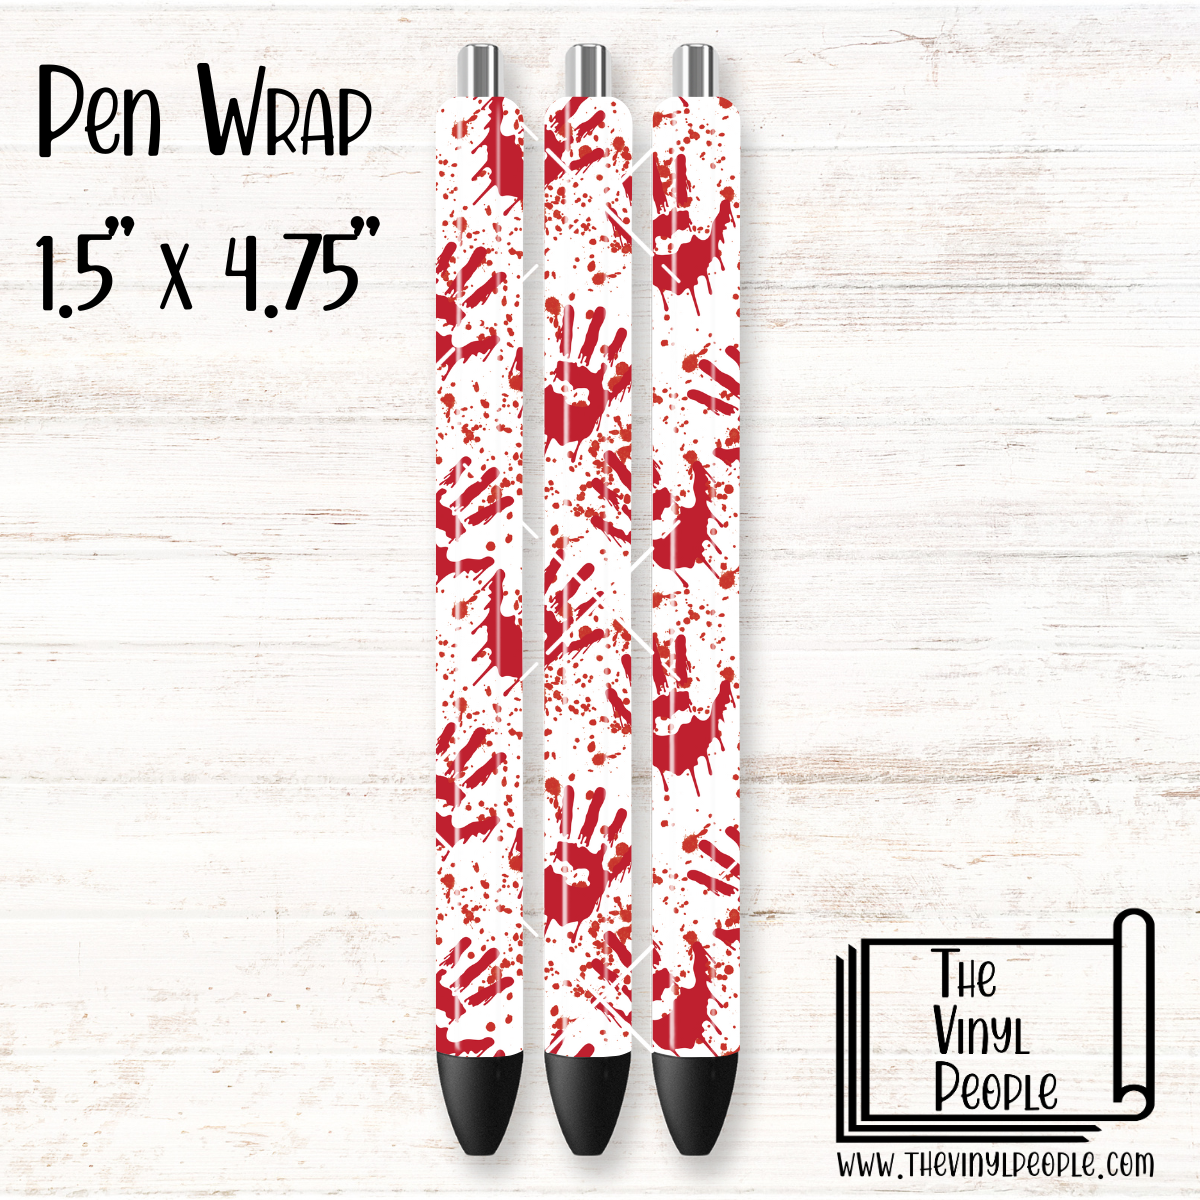 Caught Red Handed Pen Wrap